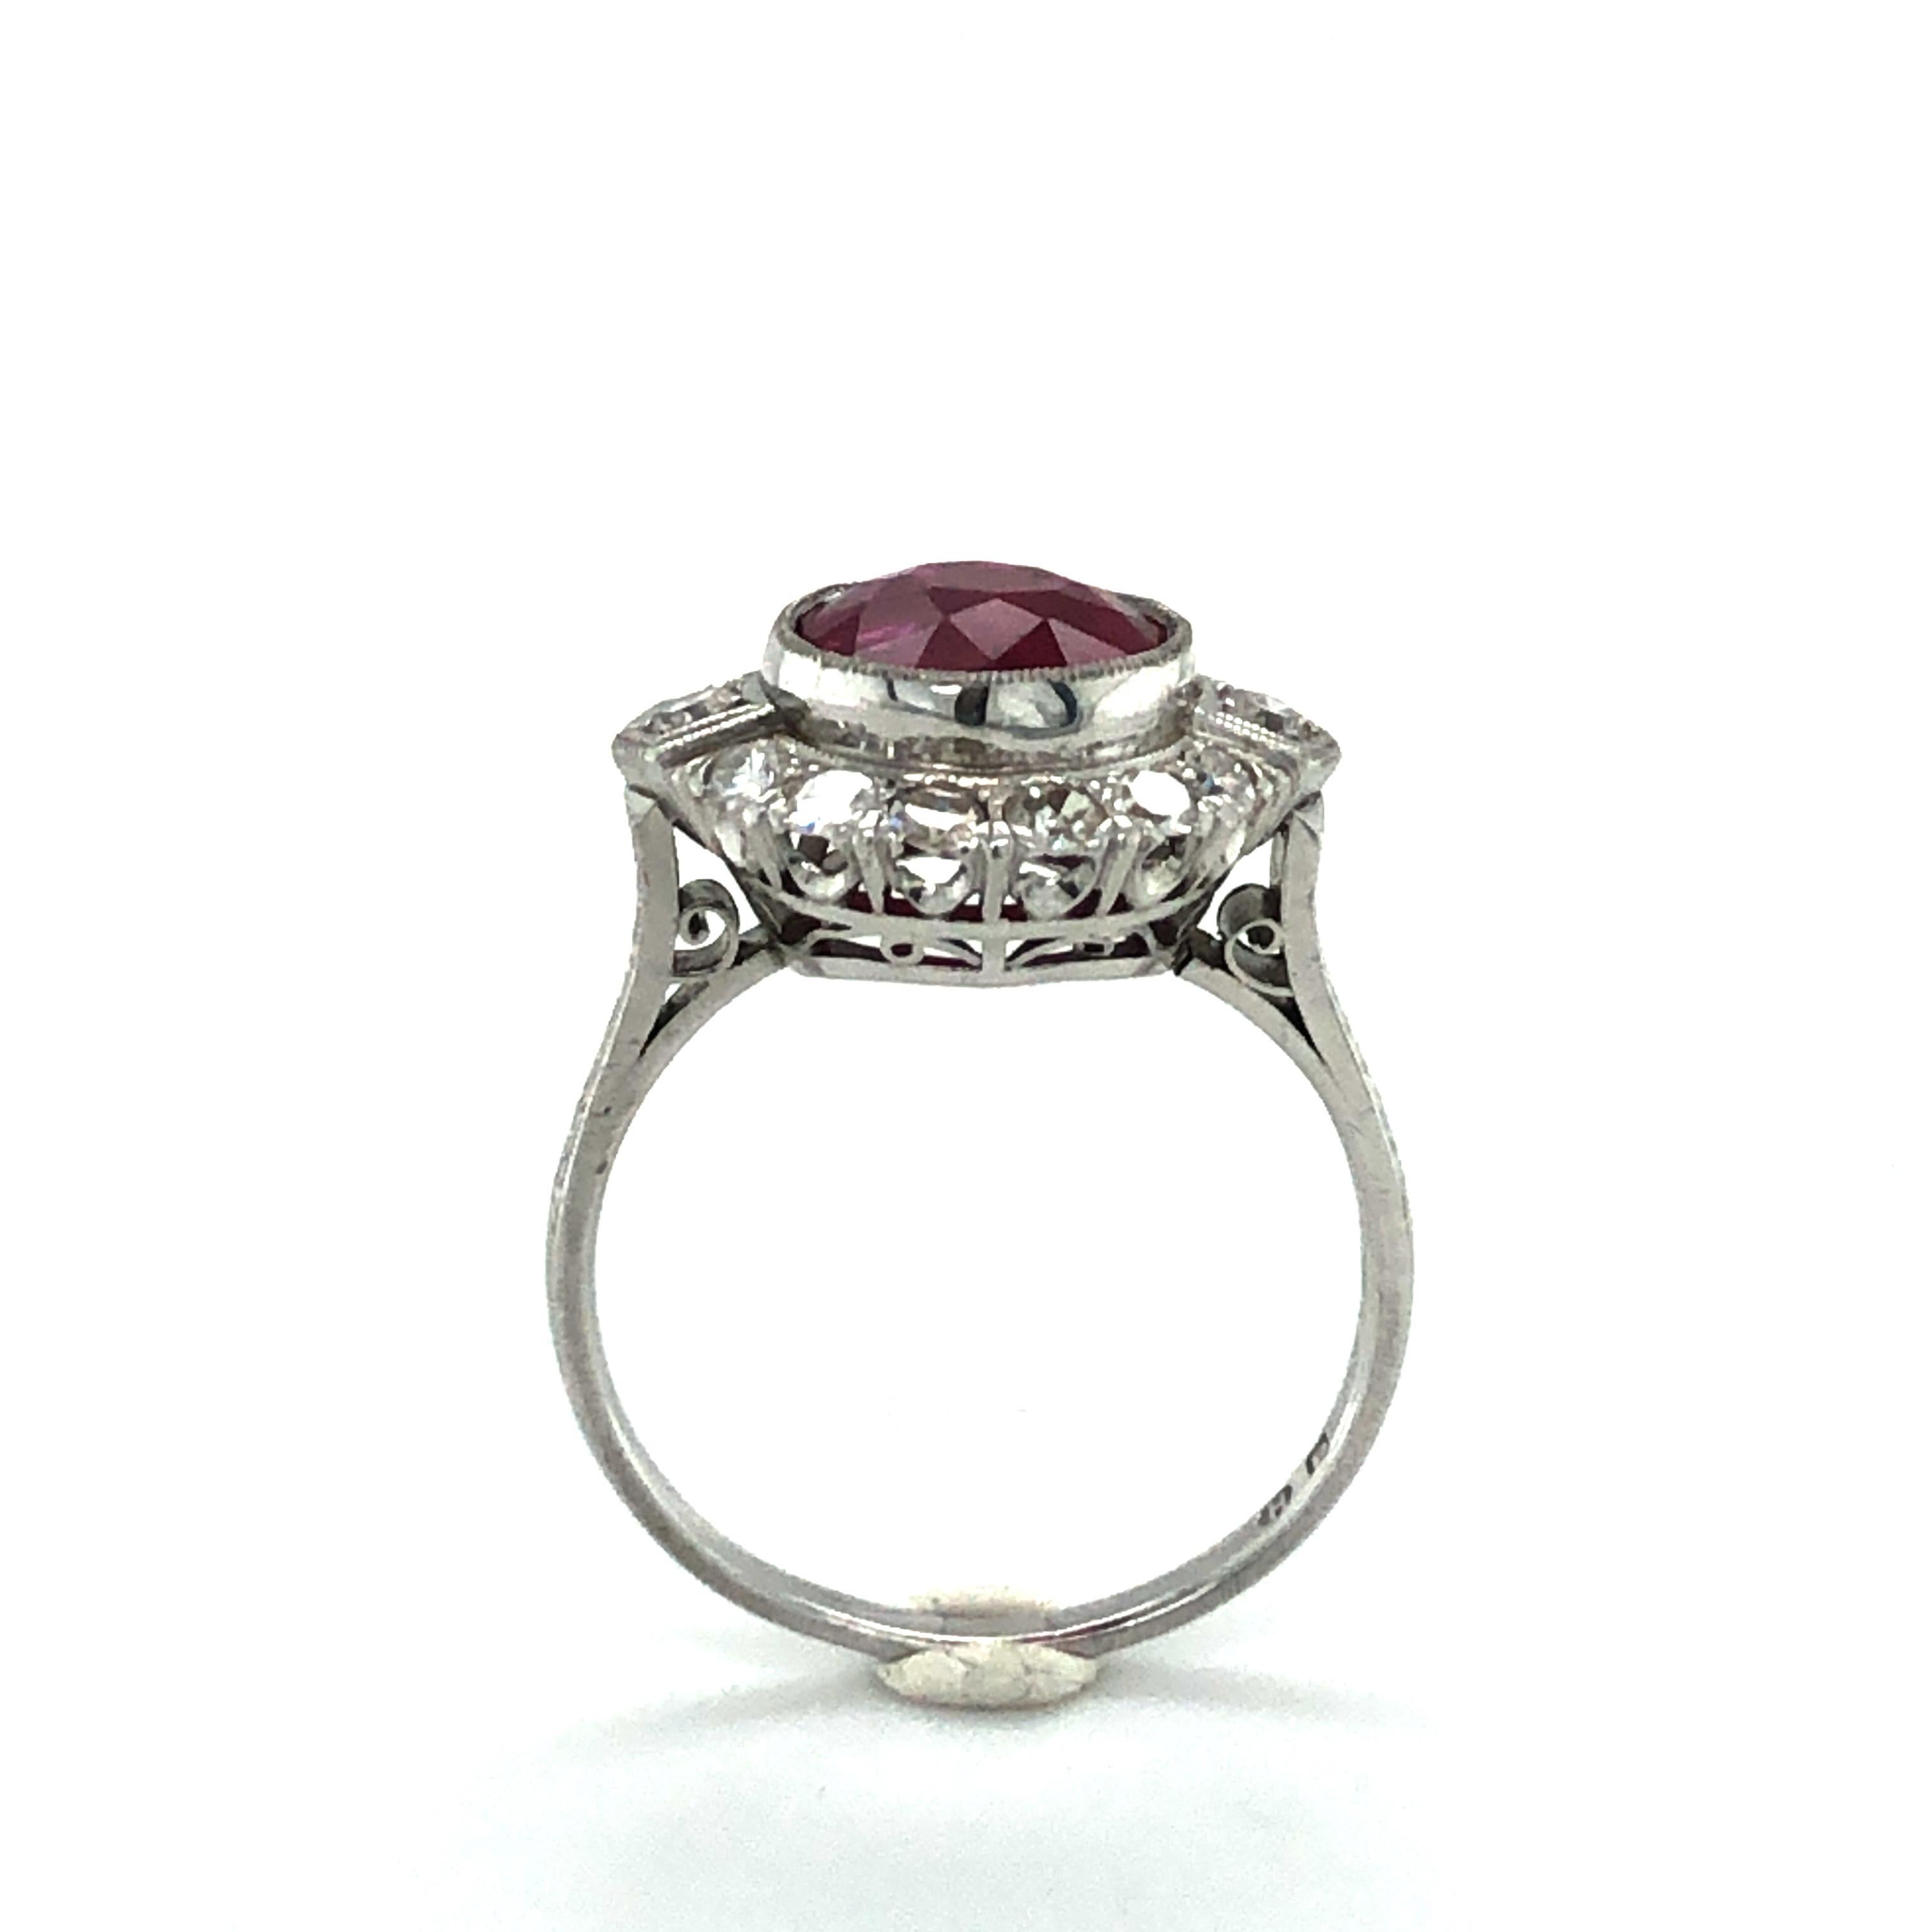 Fabulous Art Deco Ring with Burmese Ruby and Diamonds in Platinum 950 2